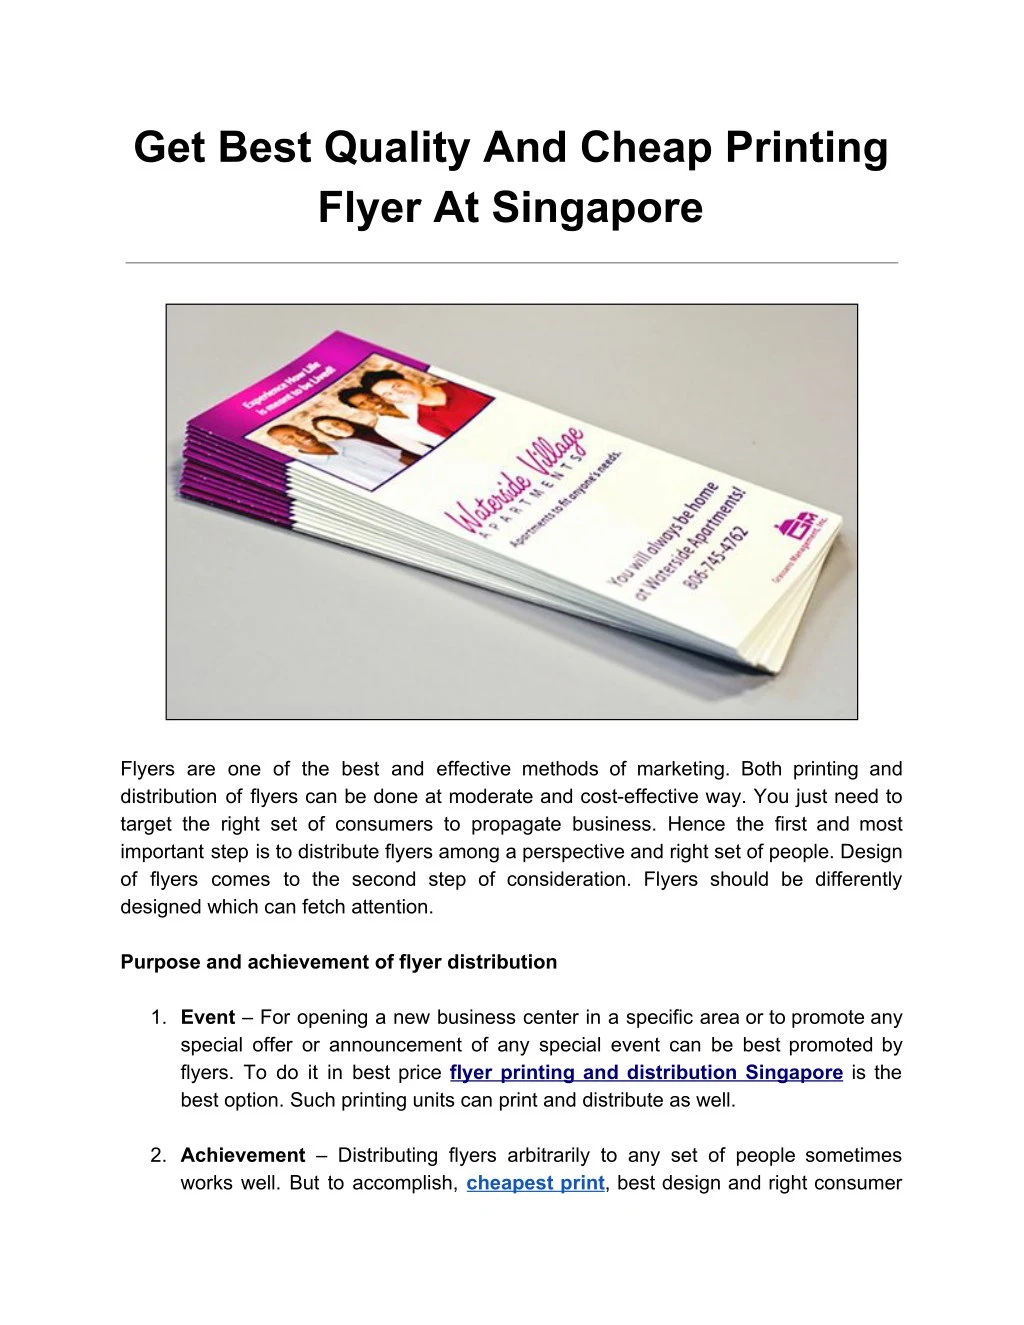 get best quality and cheap printing flyer n.